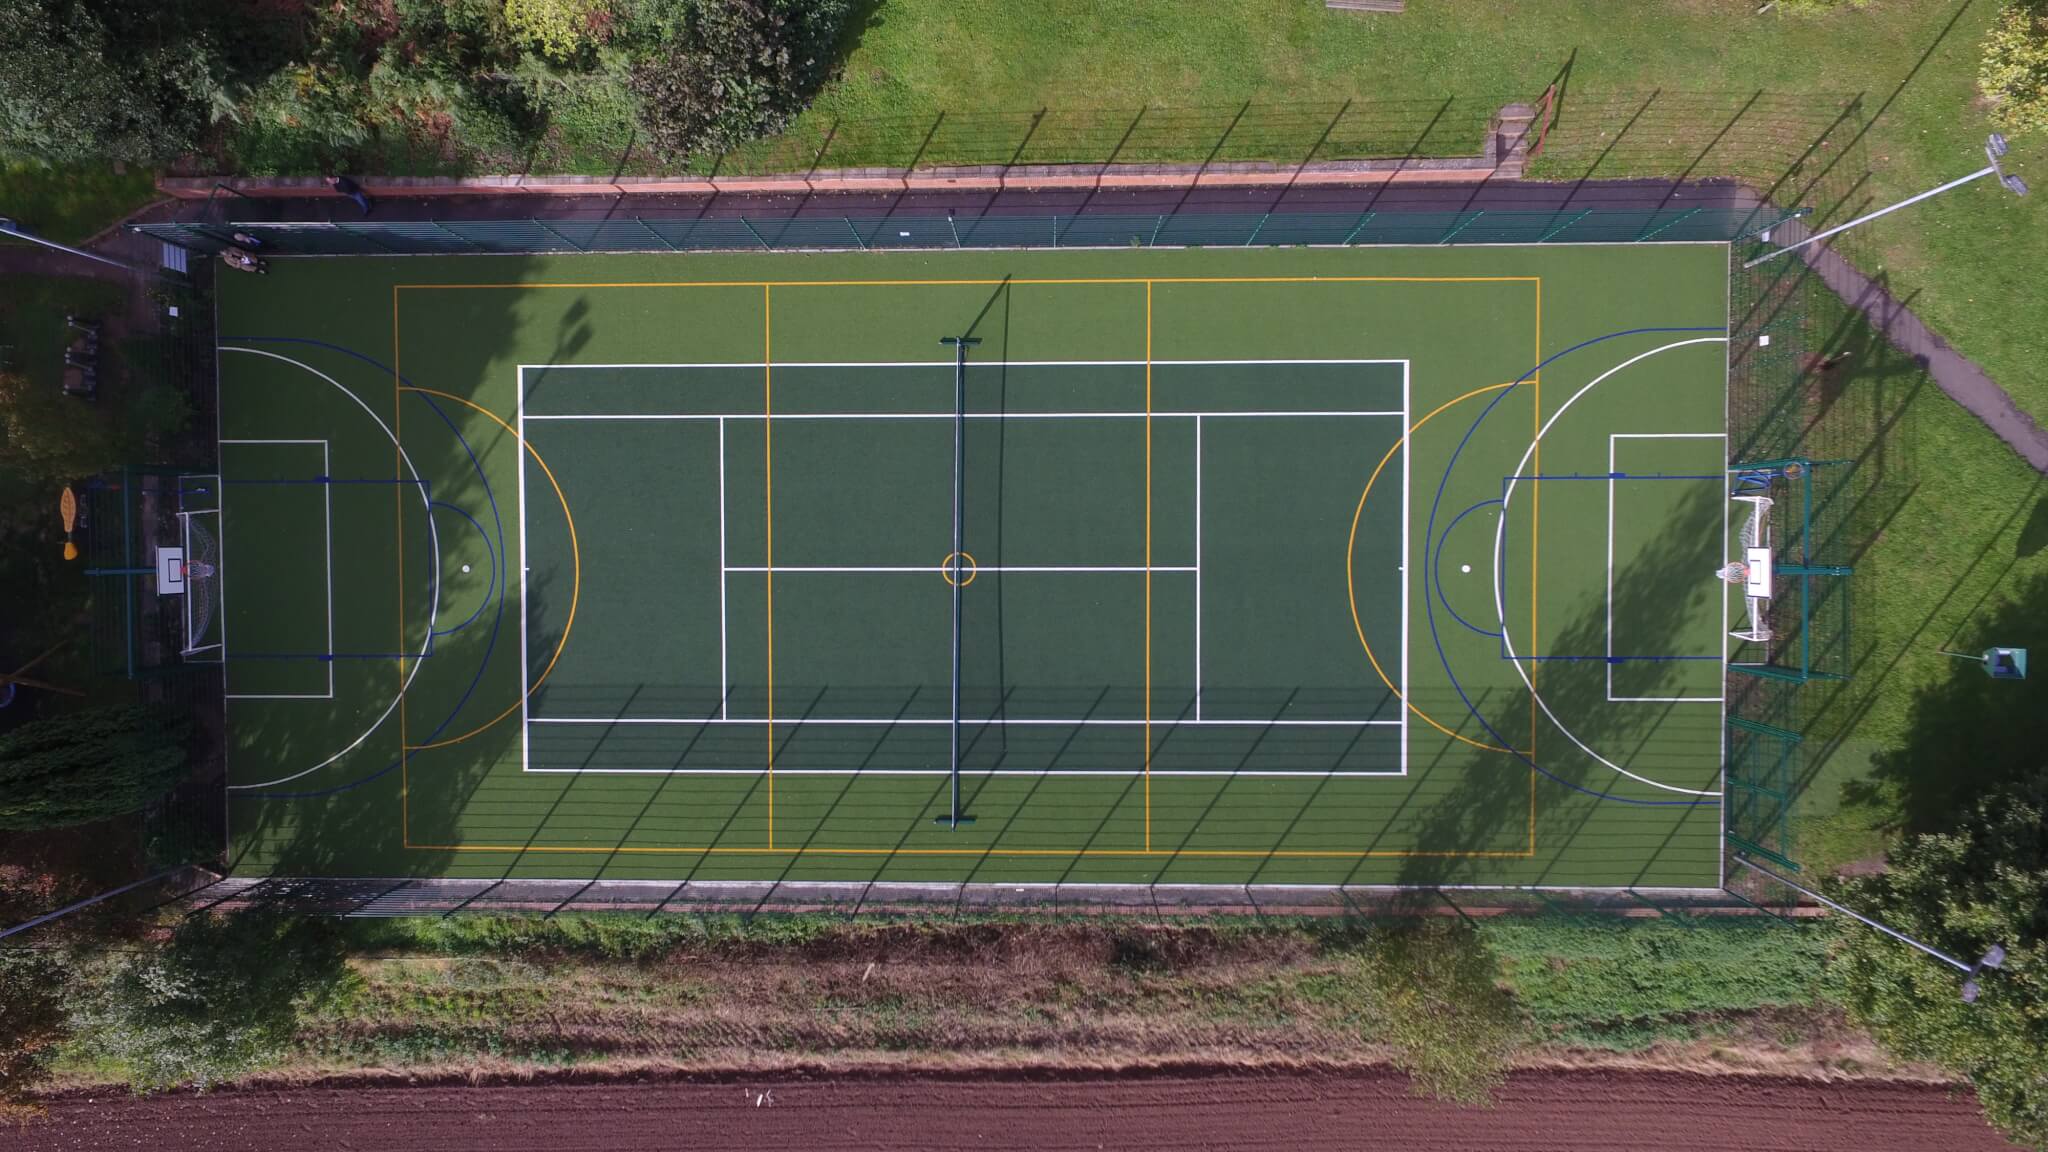 Top view of Football field with artificial Grass